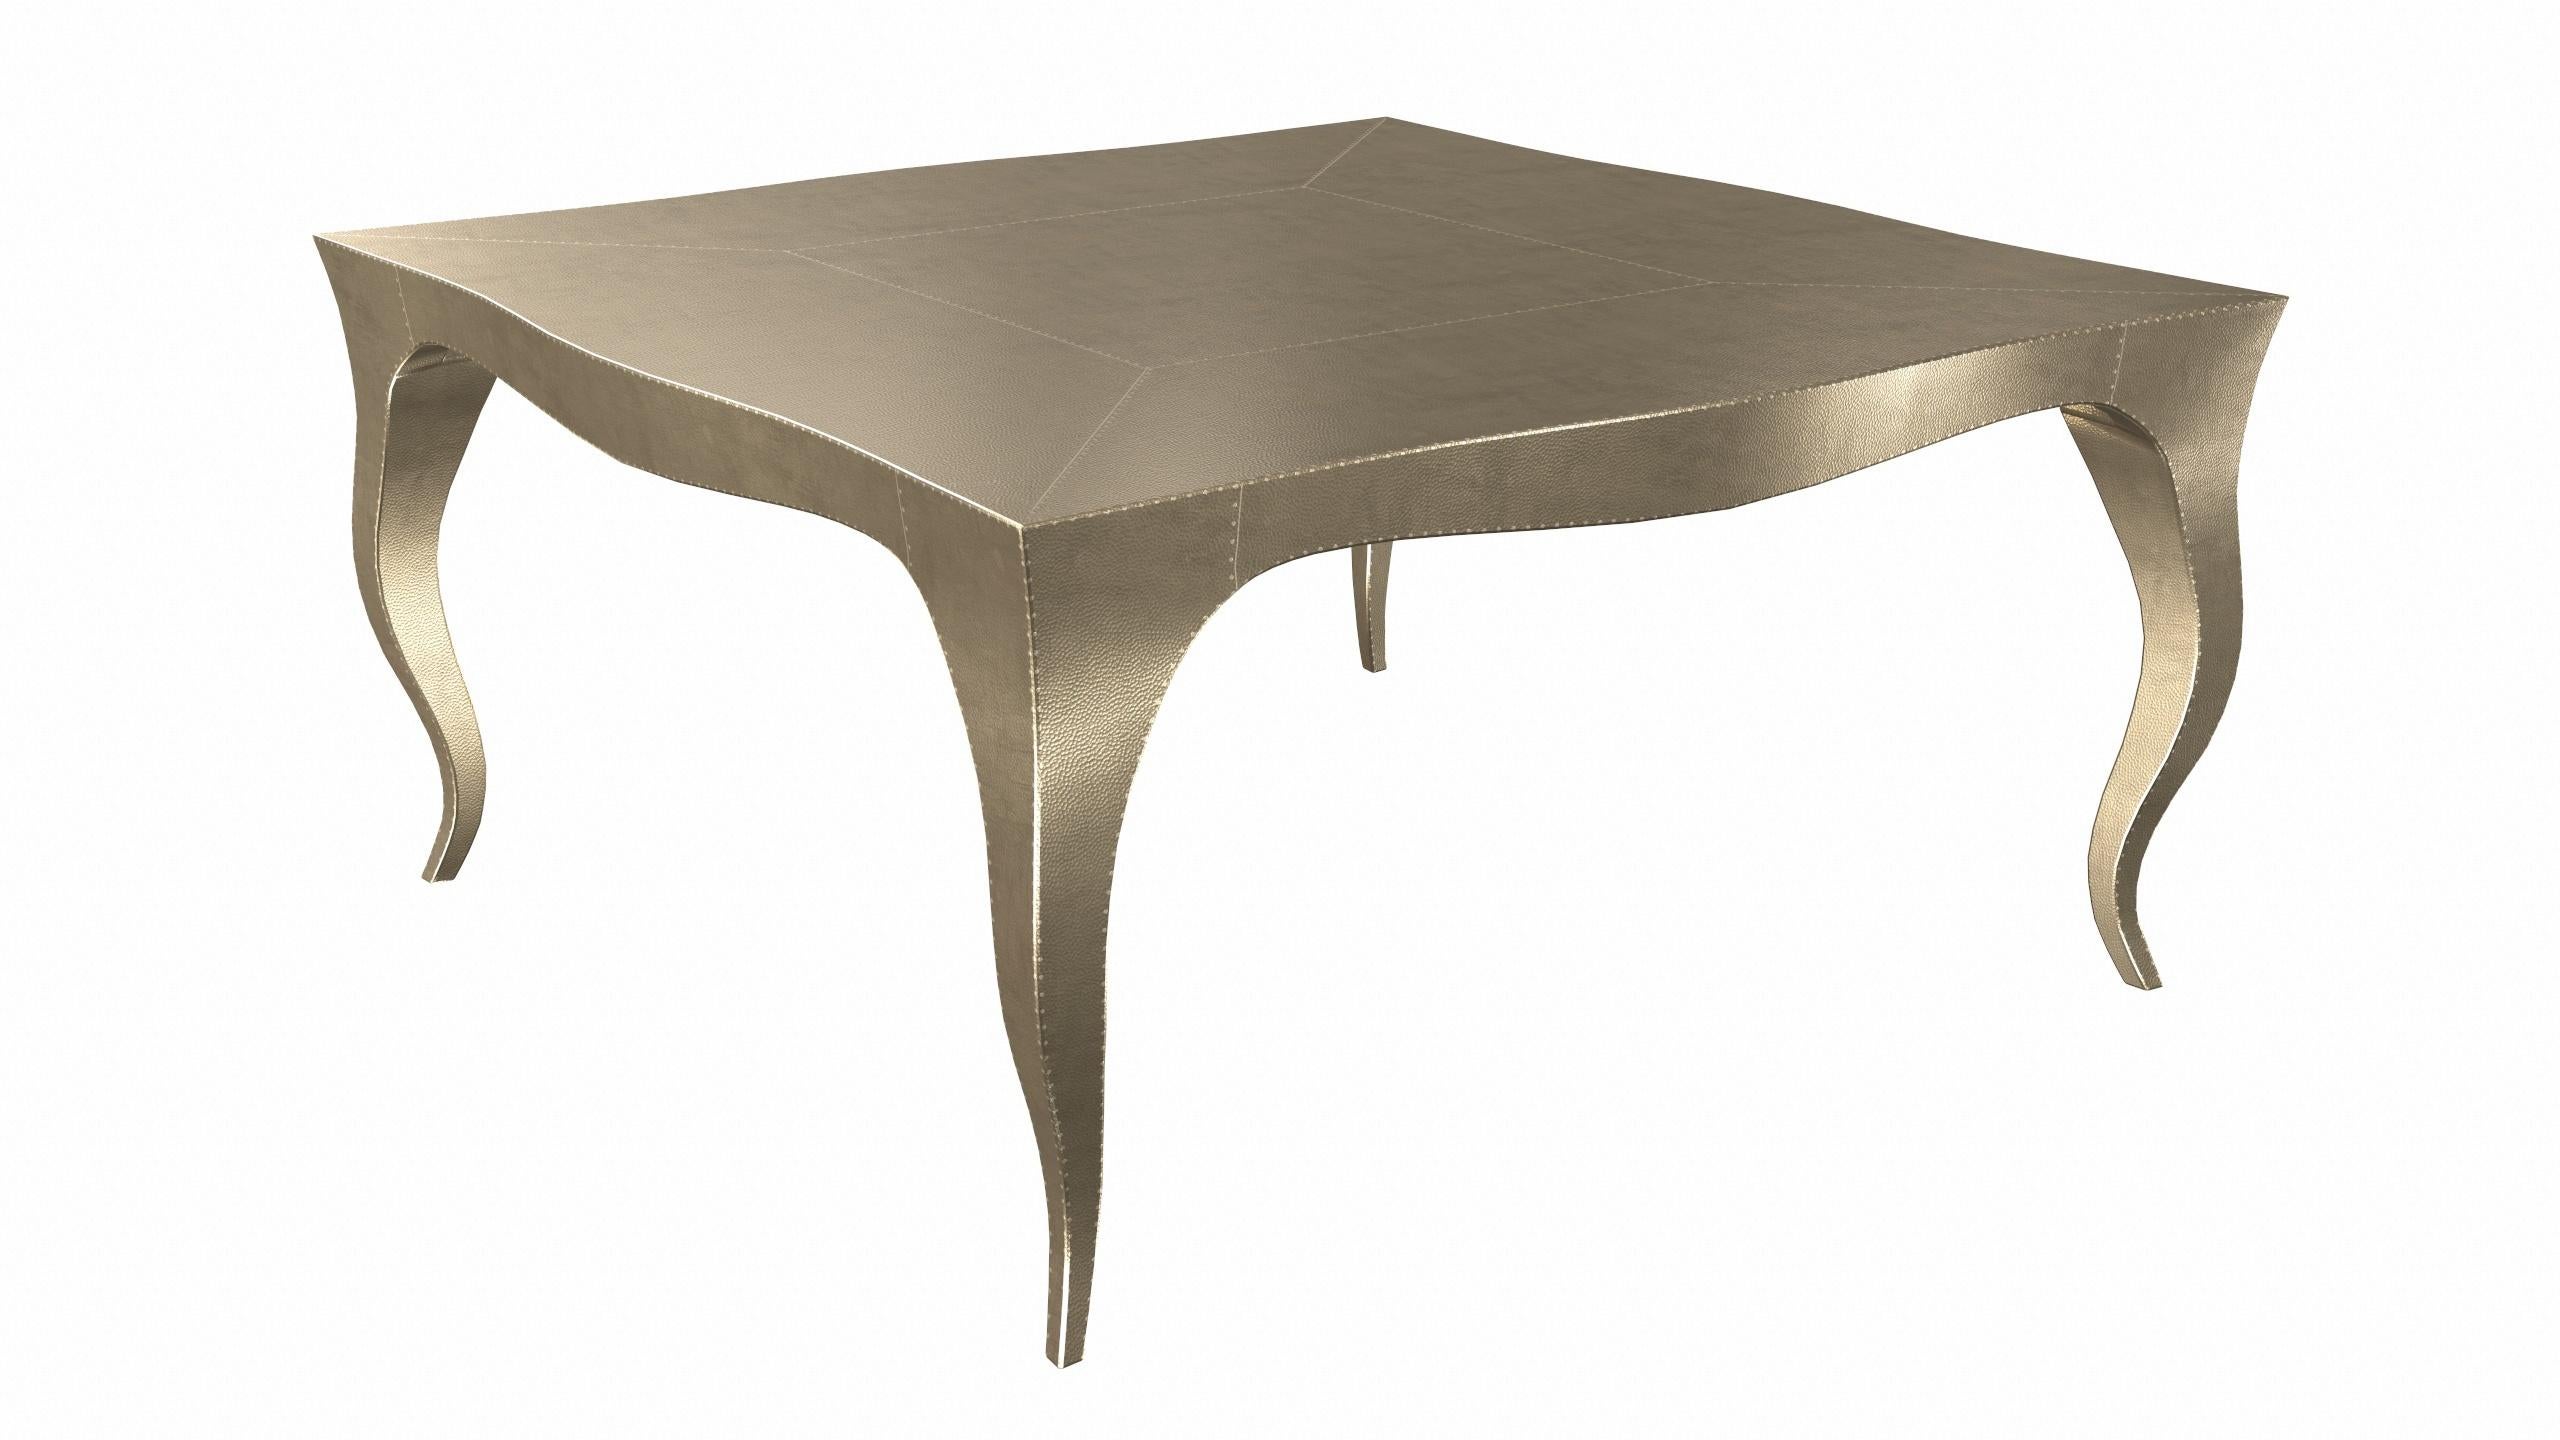 Contemporary Louise Art Deco Center Tables Mid. Hammered Brass by Paul Mathieu for S.Odegard For Sale